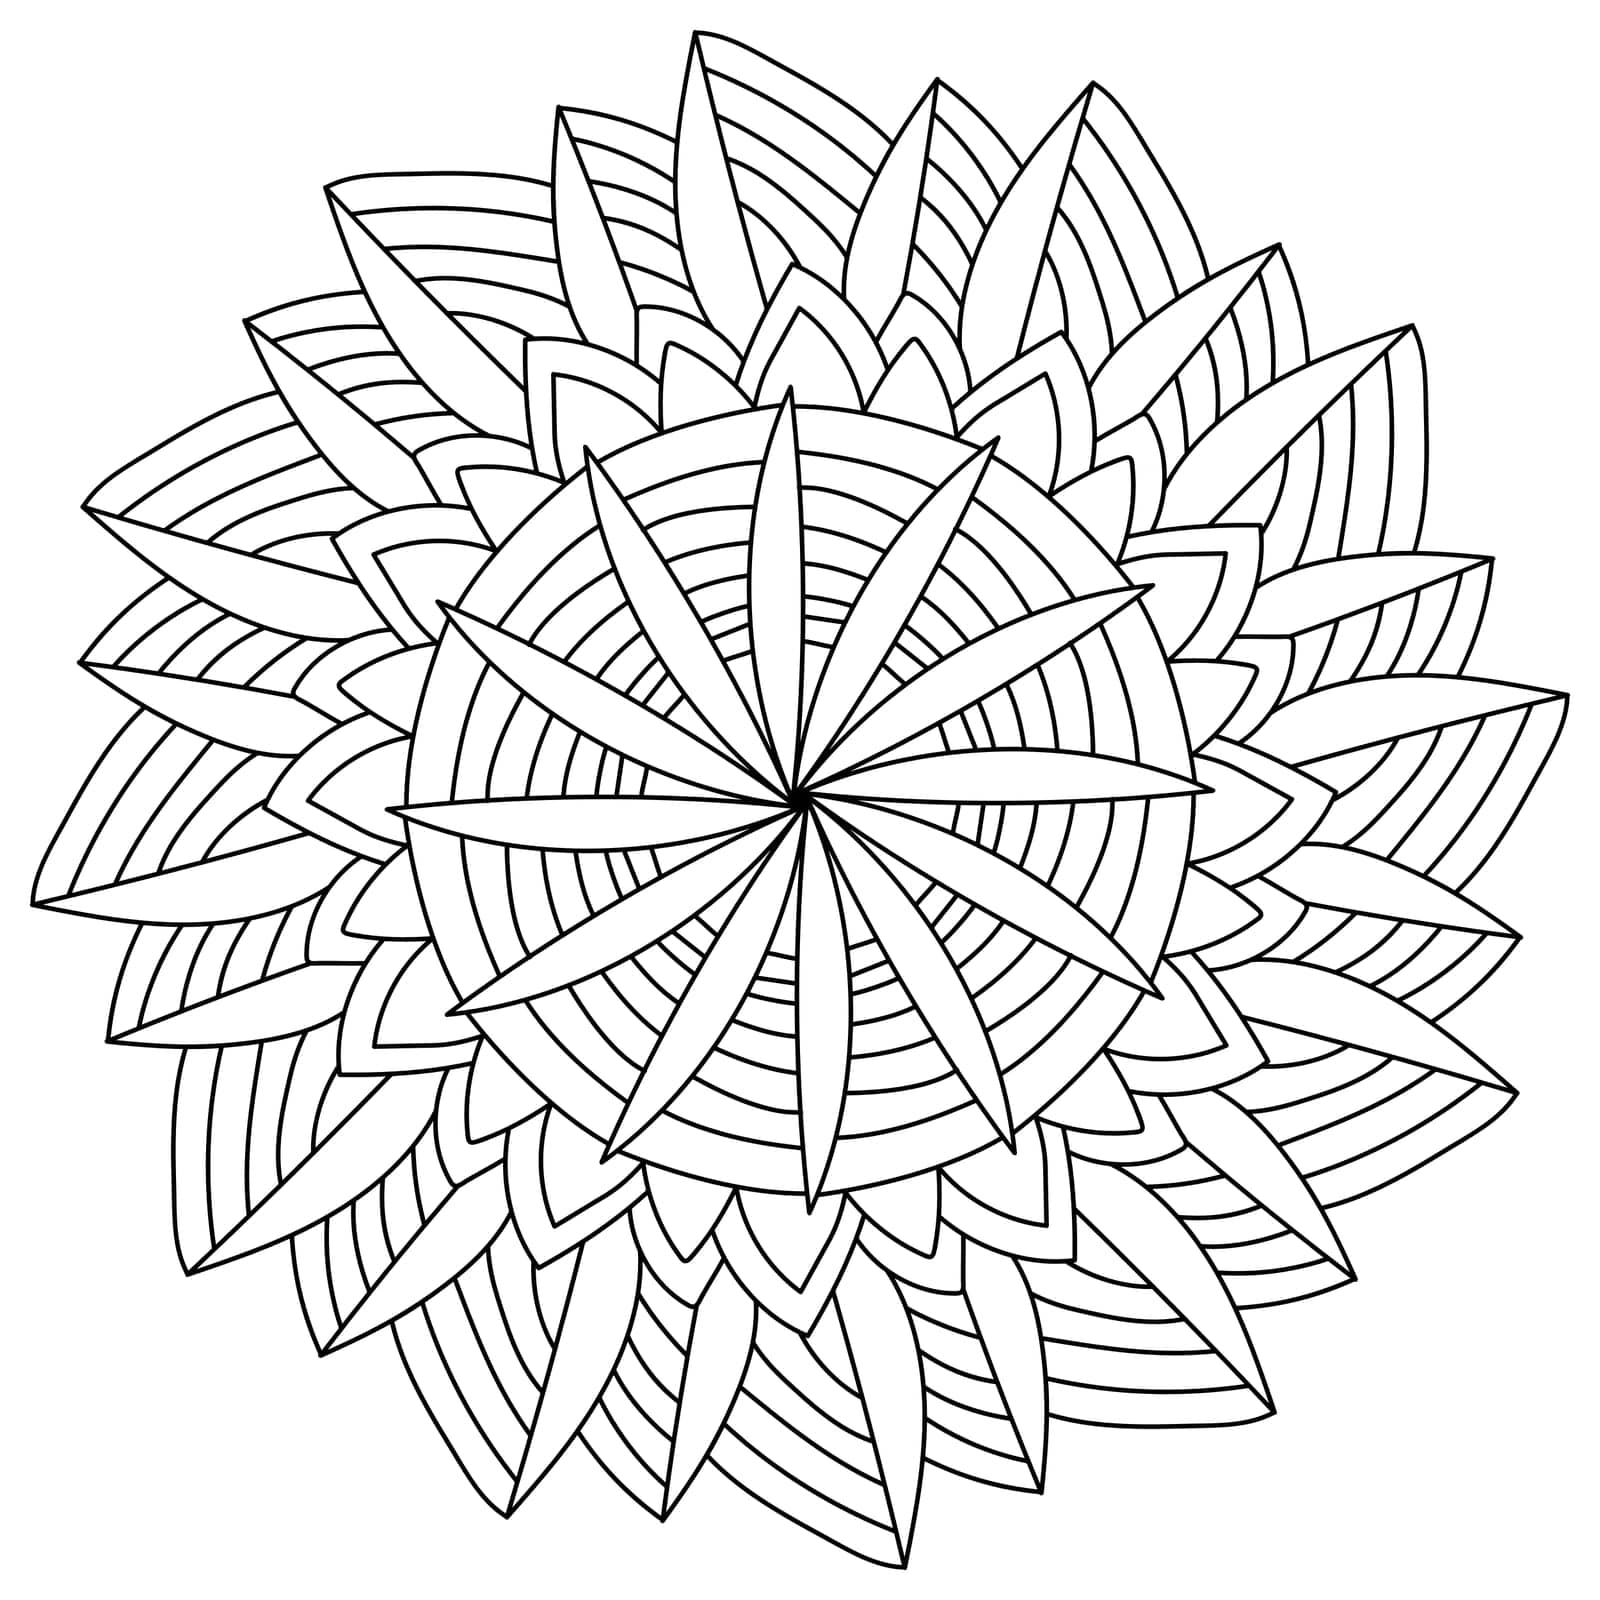 Floral mandala contour with striped petals, meditative coloring page for creativity by Sunny_Coloring